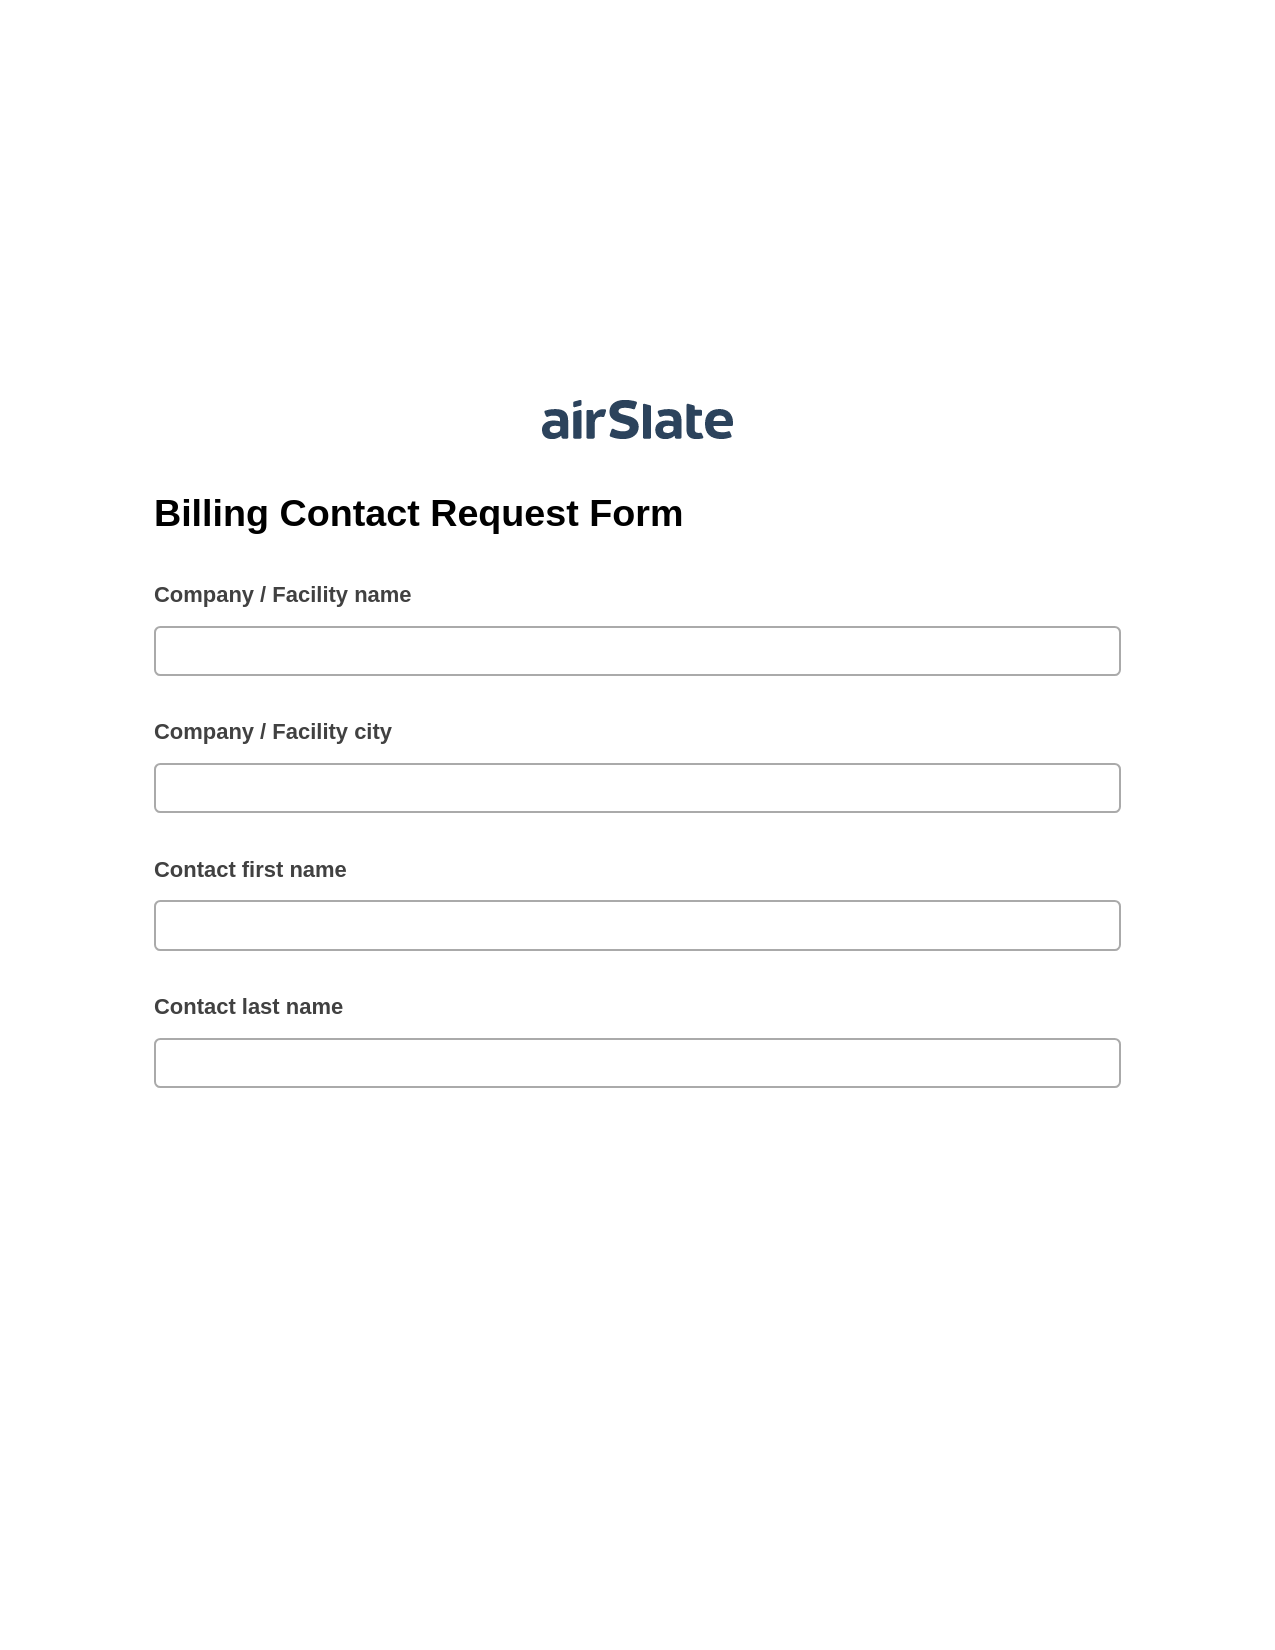 Billing Contact Request Form System Bot - Slack Two-Way Binding Bot, Hide Signatures Bot, Export to Salesforce Bot